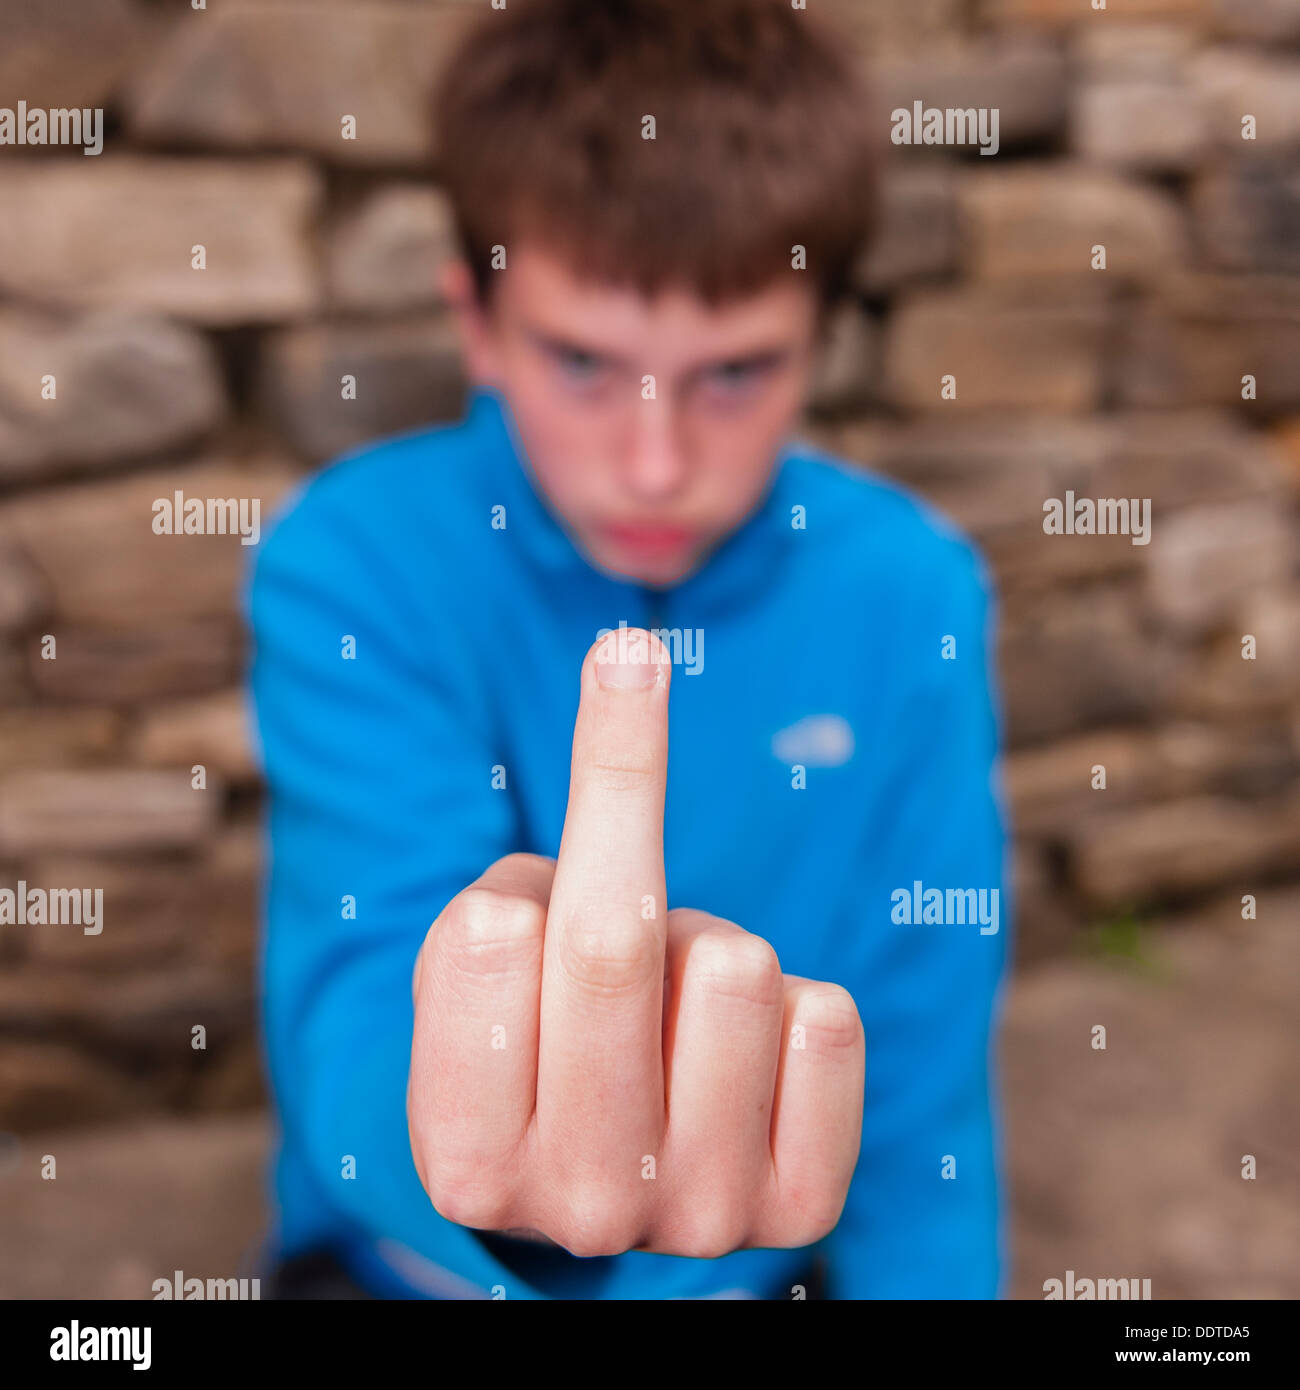 A 13 year old teenage boy being rude by sticking his middle finger up at the camera outside Stock Photo